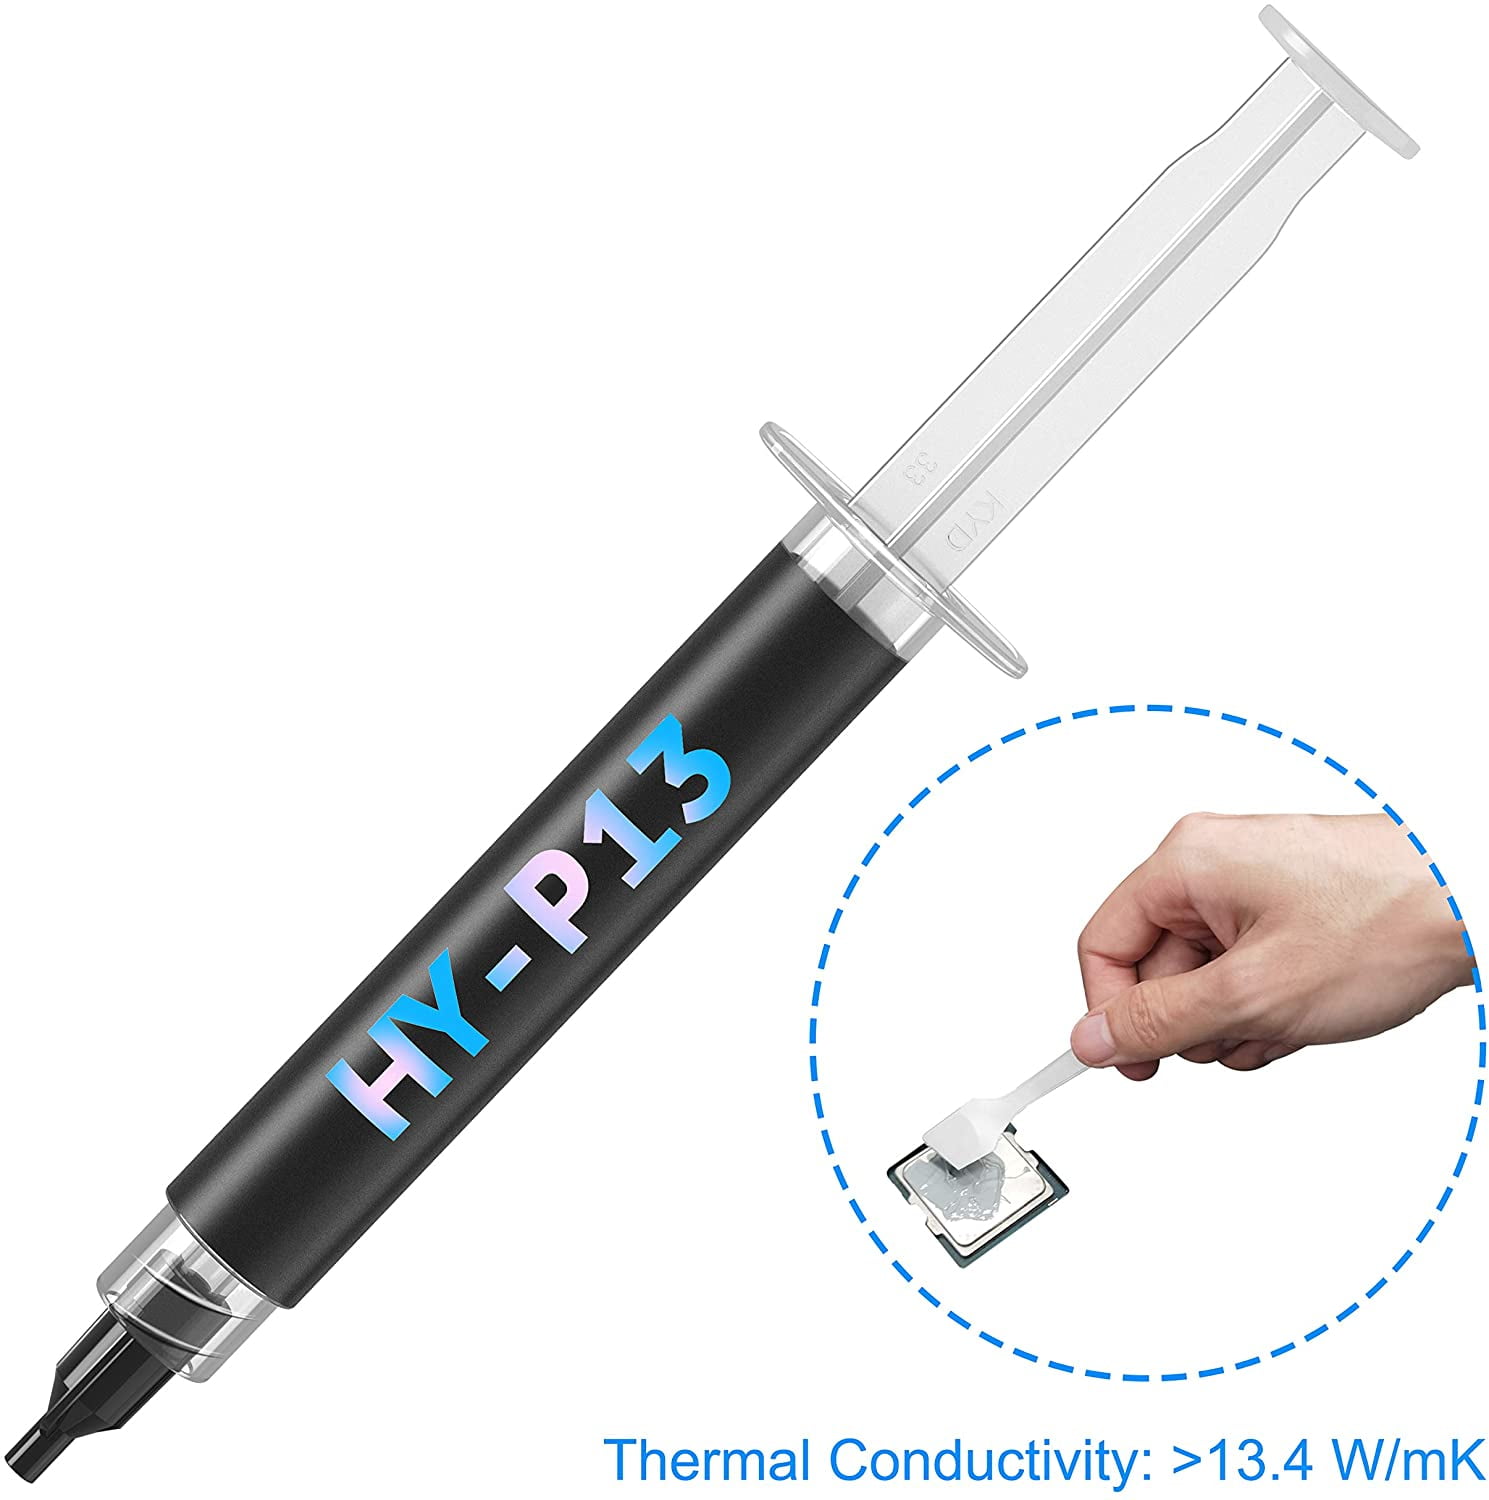 1 Grams Thermal Compound CPU for All Coolers HY-P13 Thermal Conductivity: 13.5W/m-k Thermal Paste,CPU Paste;Heatsink Past;Thermal Compound; Carbon Based High Performance Heatsink Paste